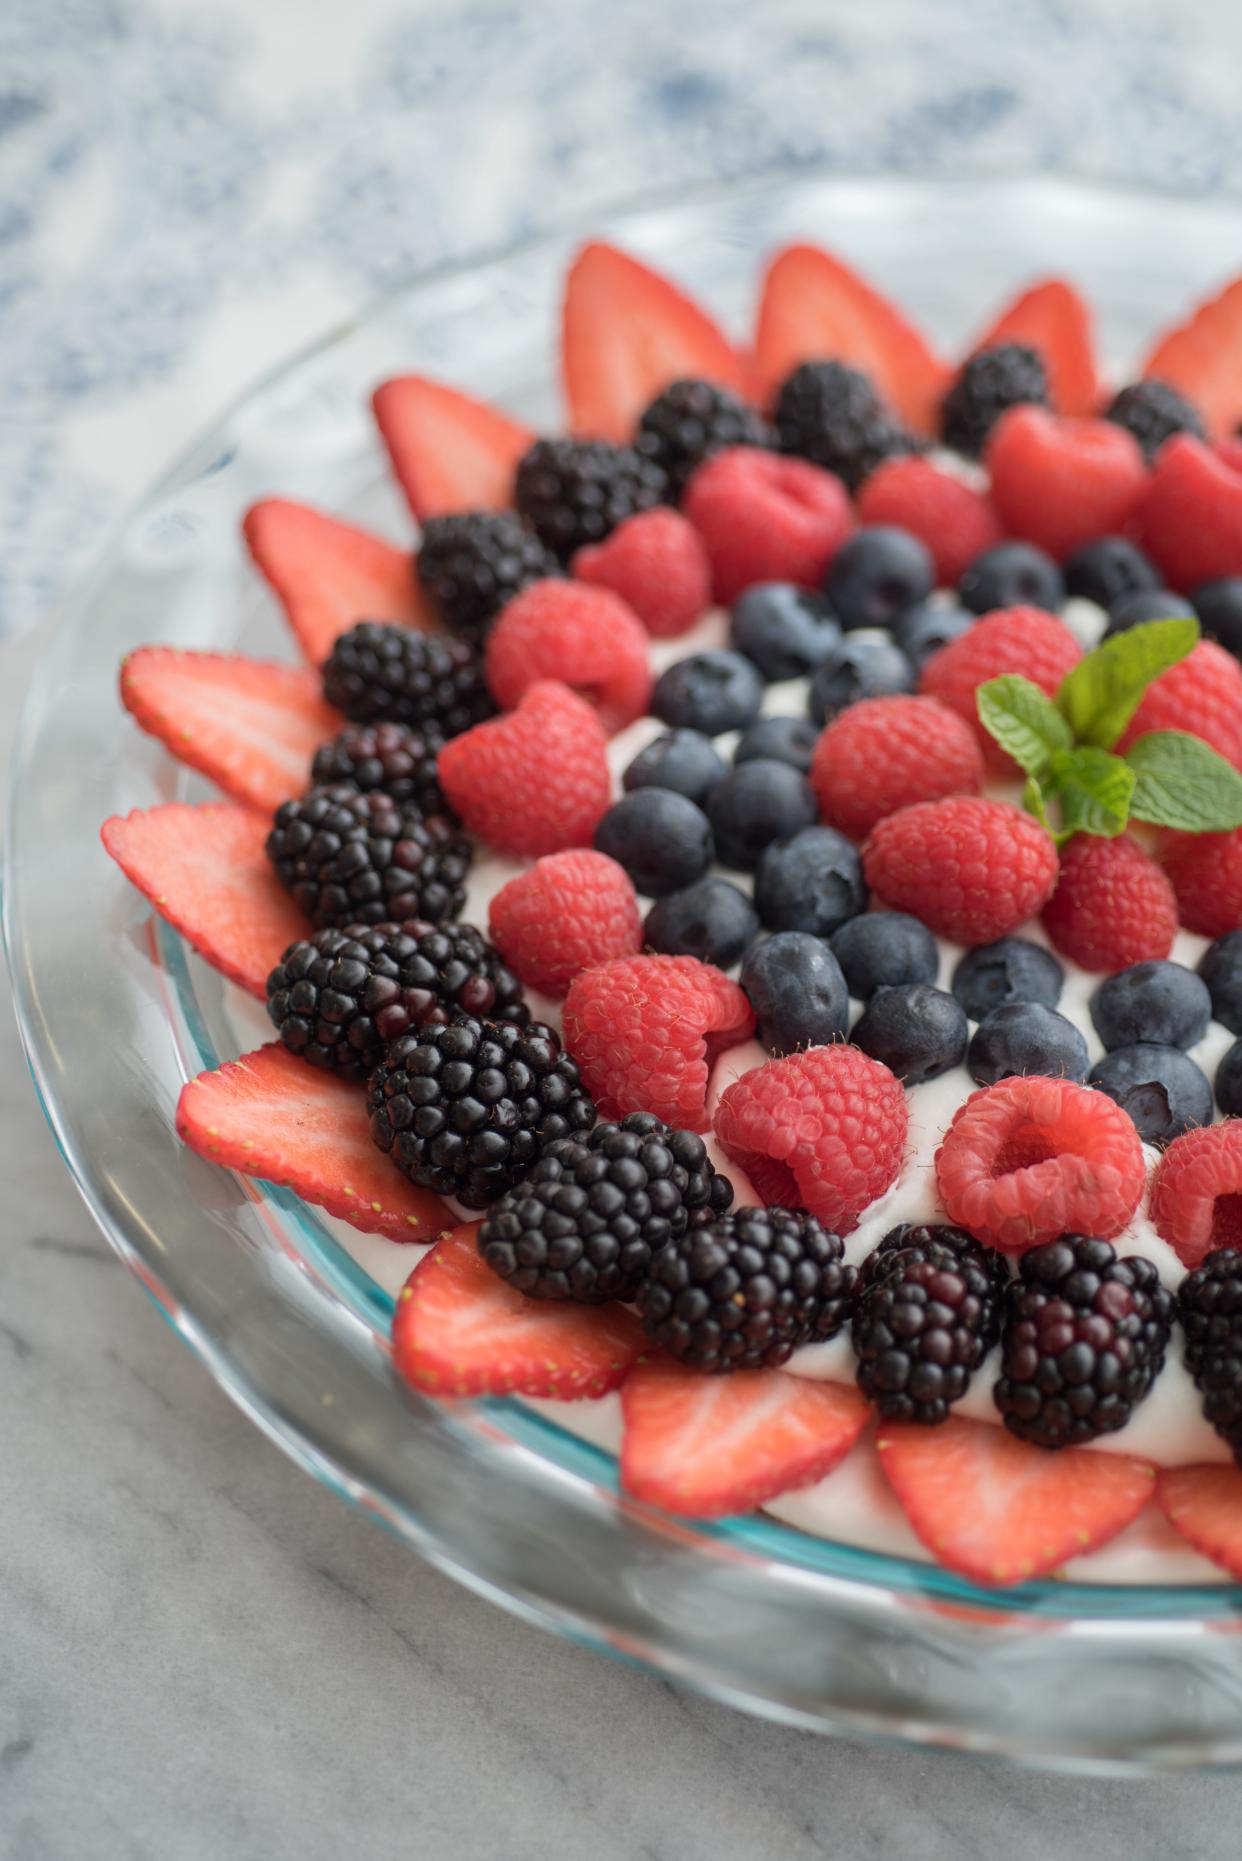 You can arrange summer berries atop today's pie recipe to turn it into a work of art.